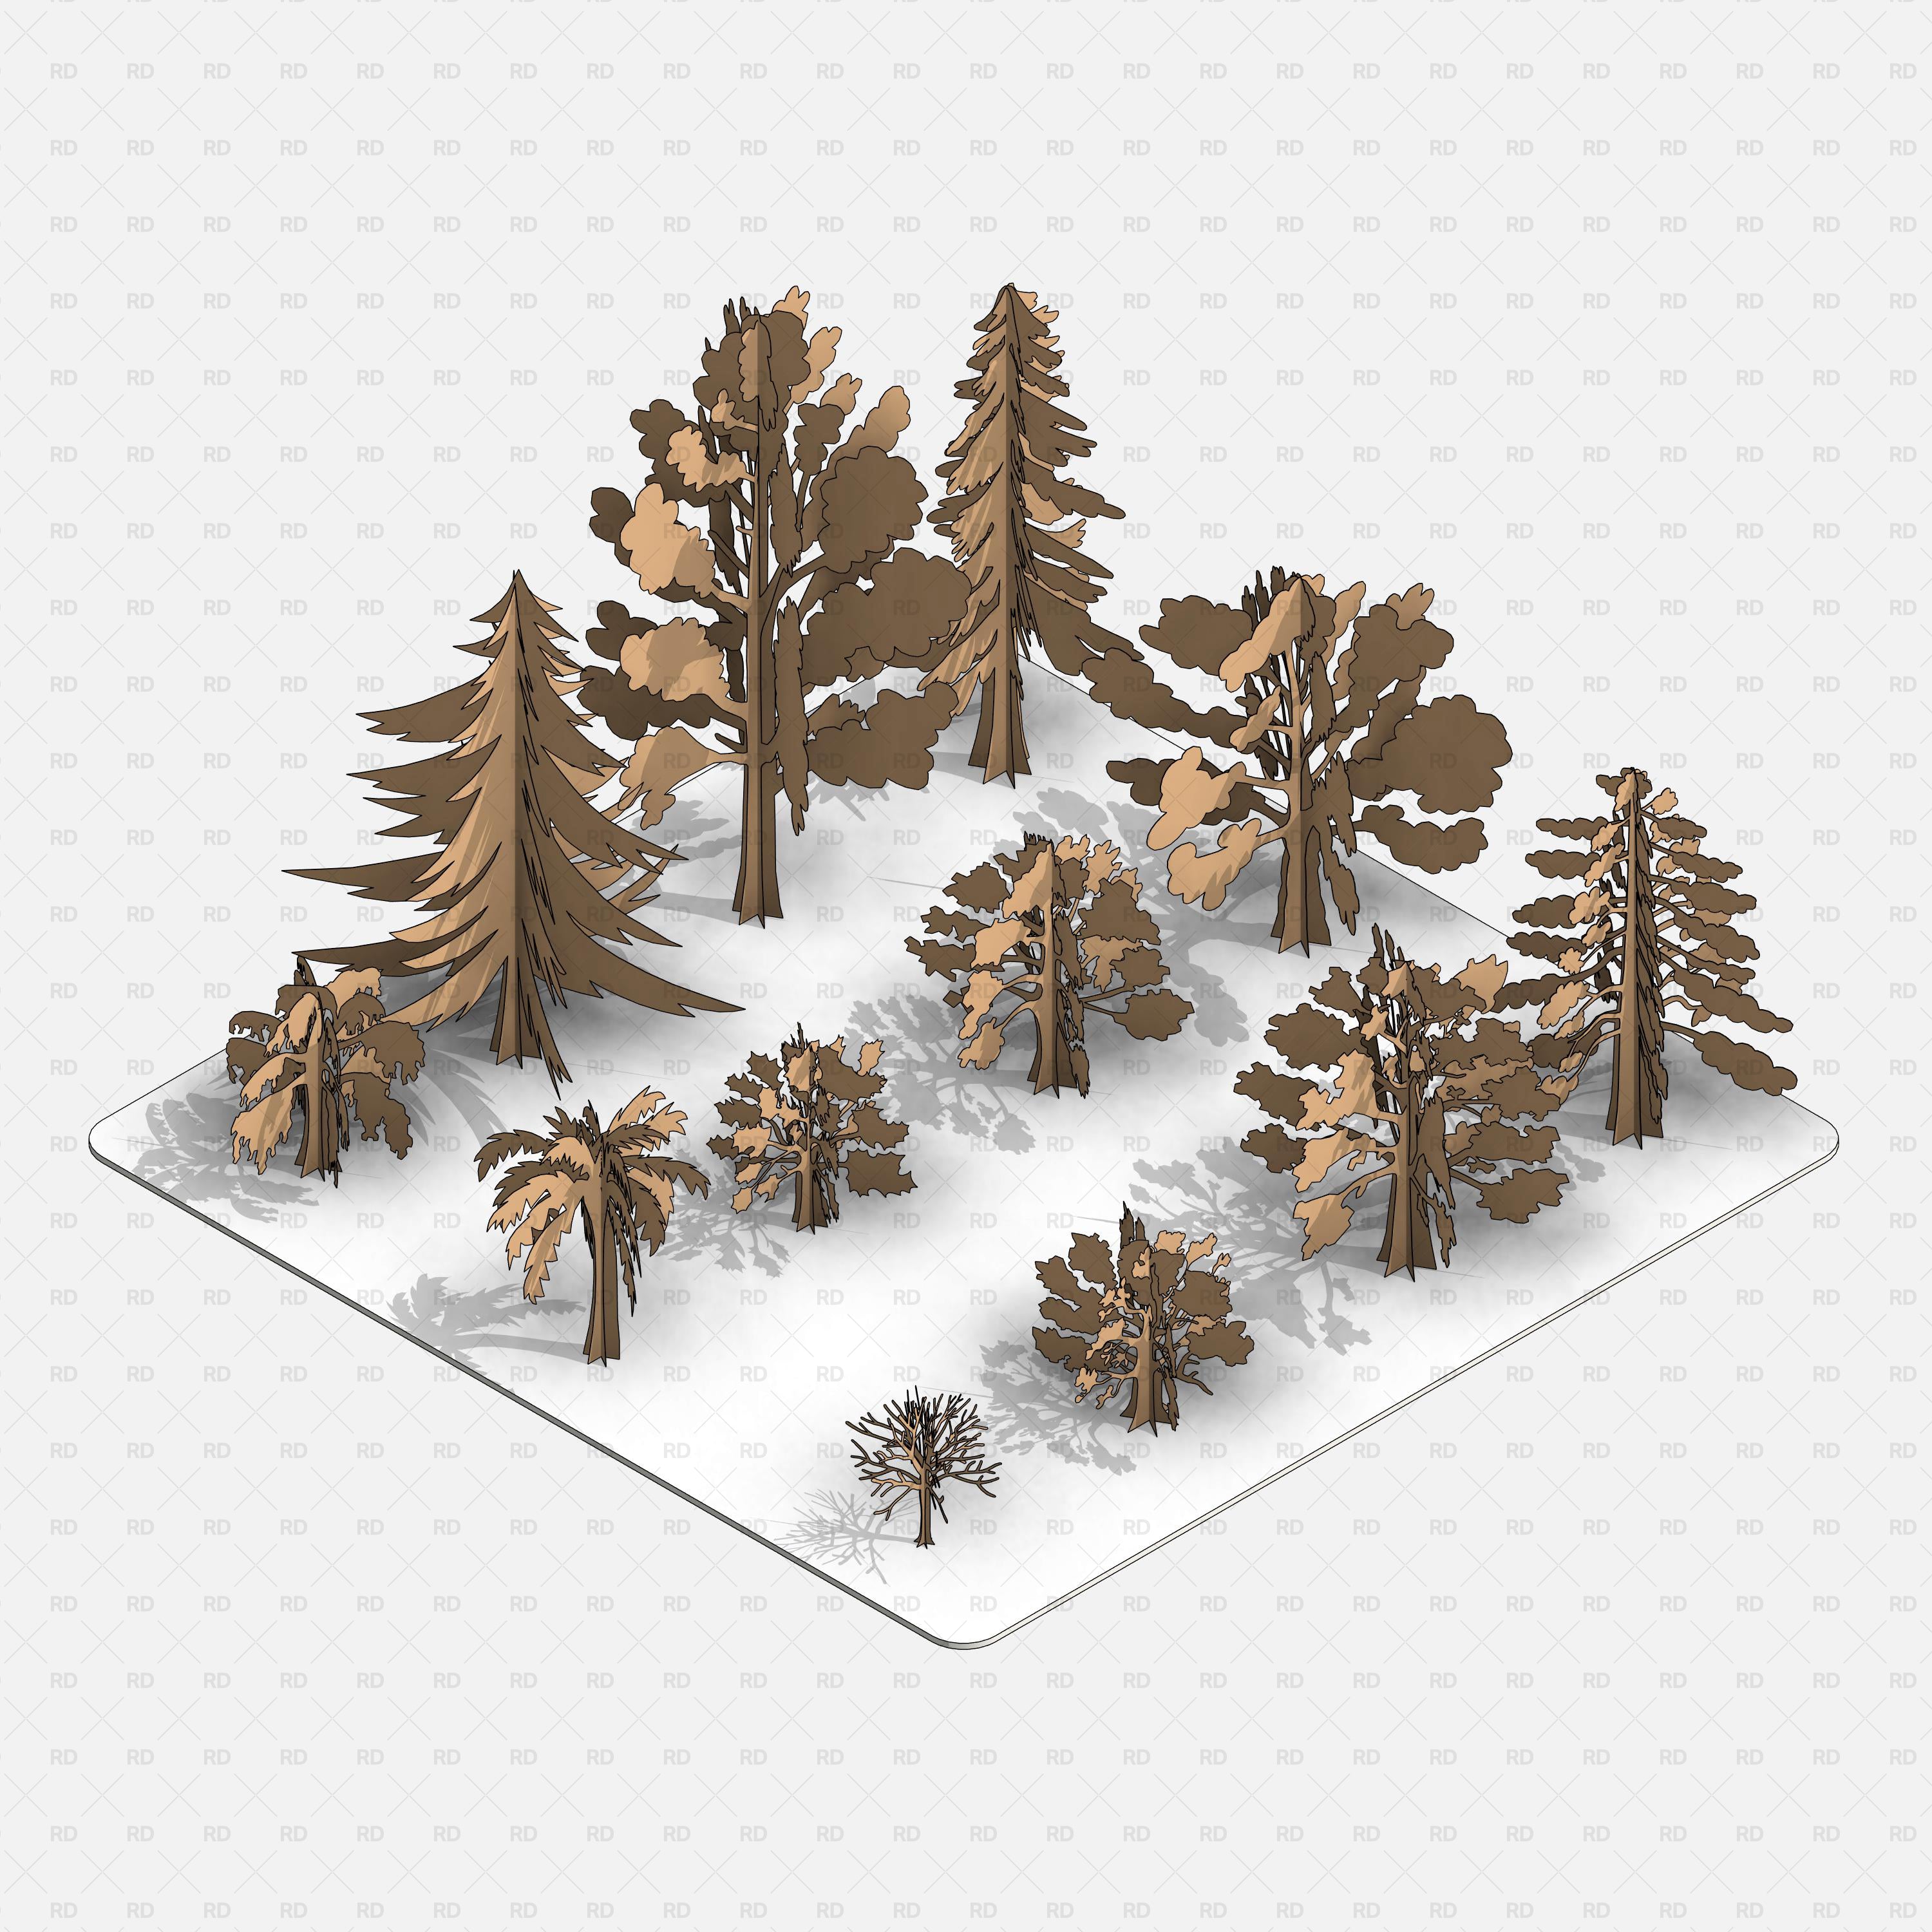 Revit Cardboard Trees - Scalable